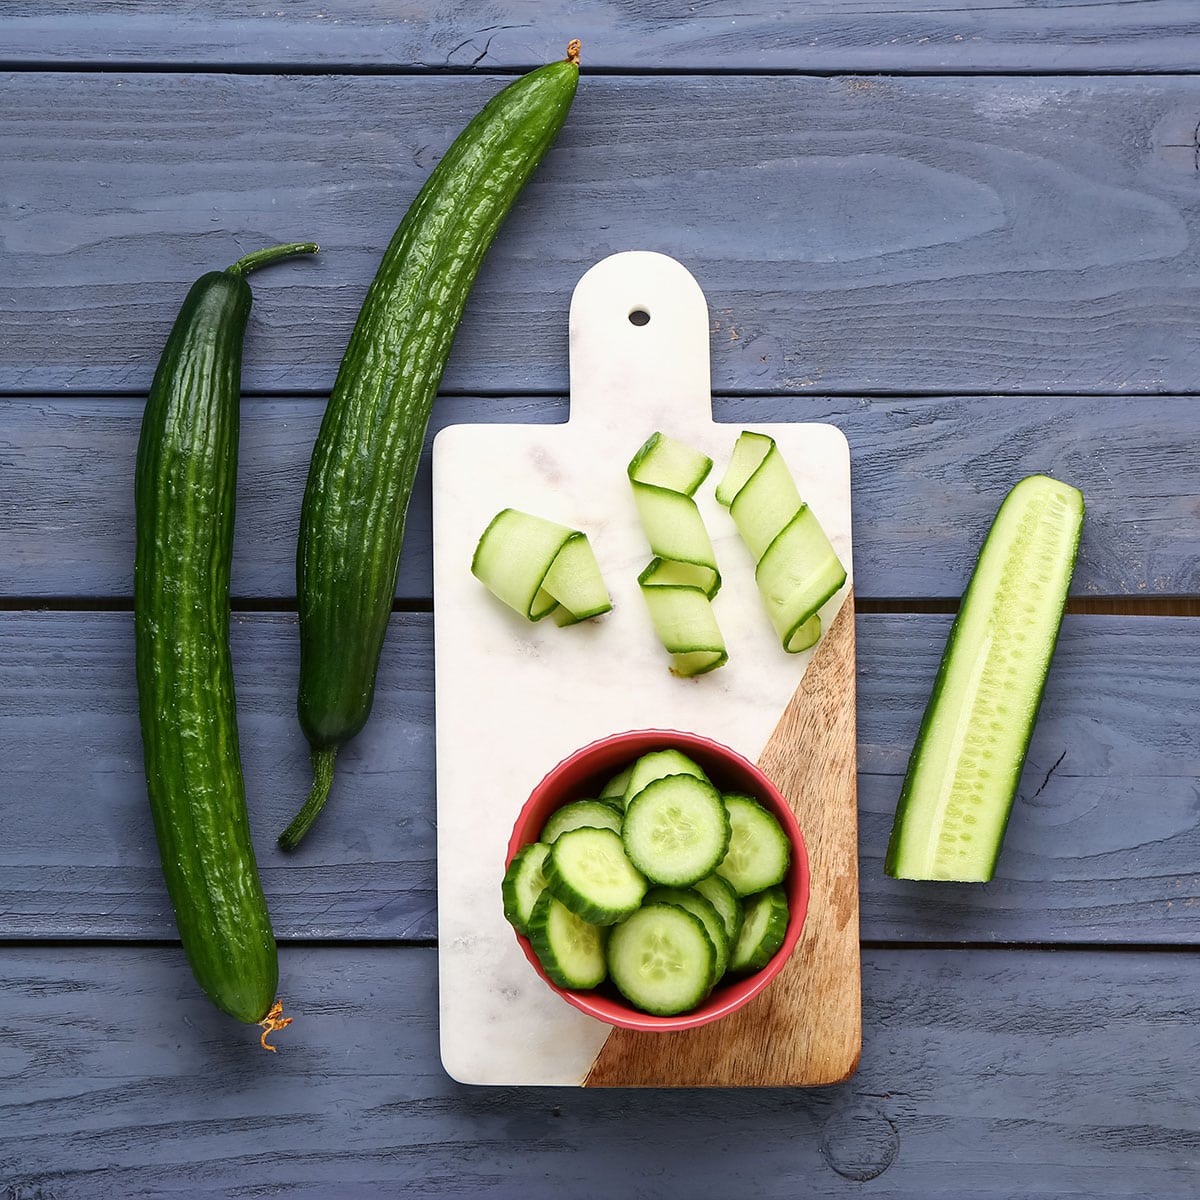 Cucumbers, sliced and curled on a cutting board, whole cucumbers next to.